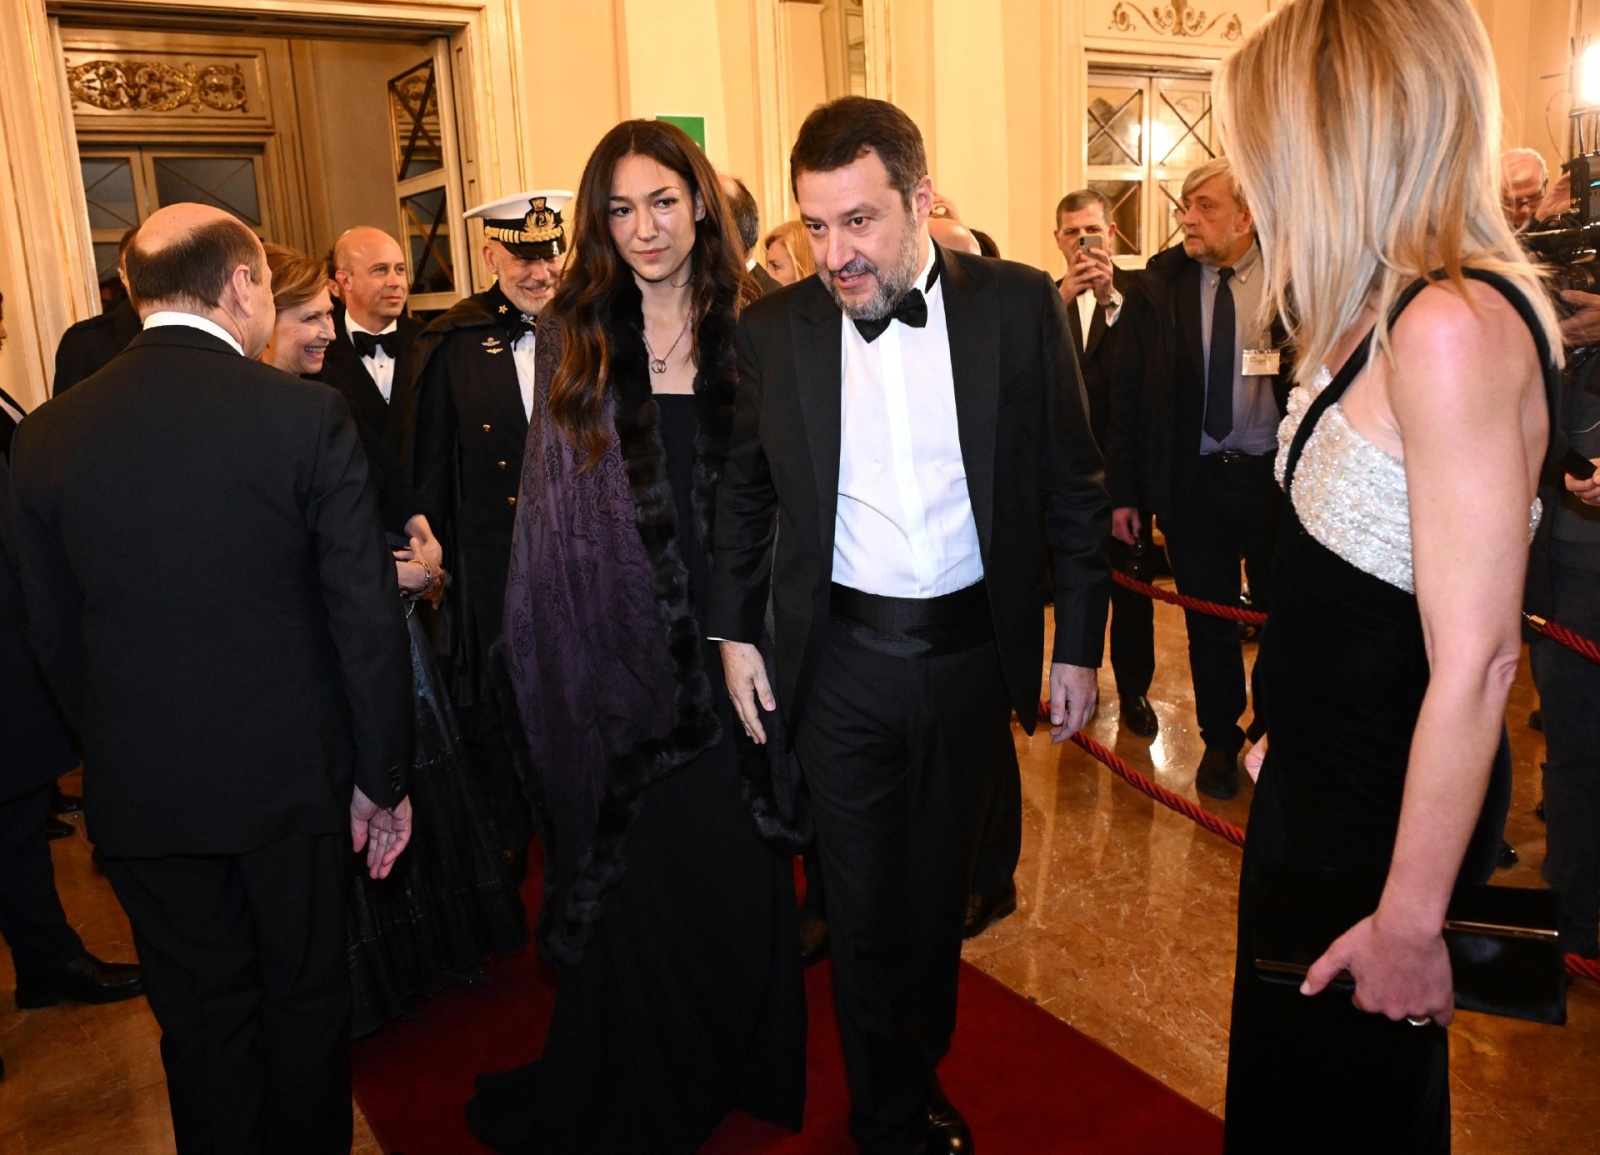 Italian deputy Prime Minister and Minister of Infrastructure and Transport, Matteo Salvini (C), arrives for the La Scala opera house's season opener to attend Giuseppe Verdi's Don Carlo, in Milan, Italy, 7 December 2023. The Scala opera house season opene